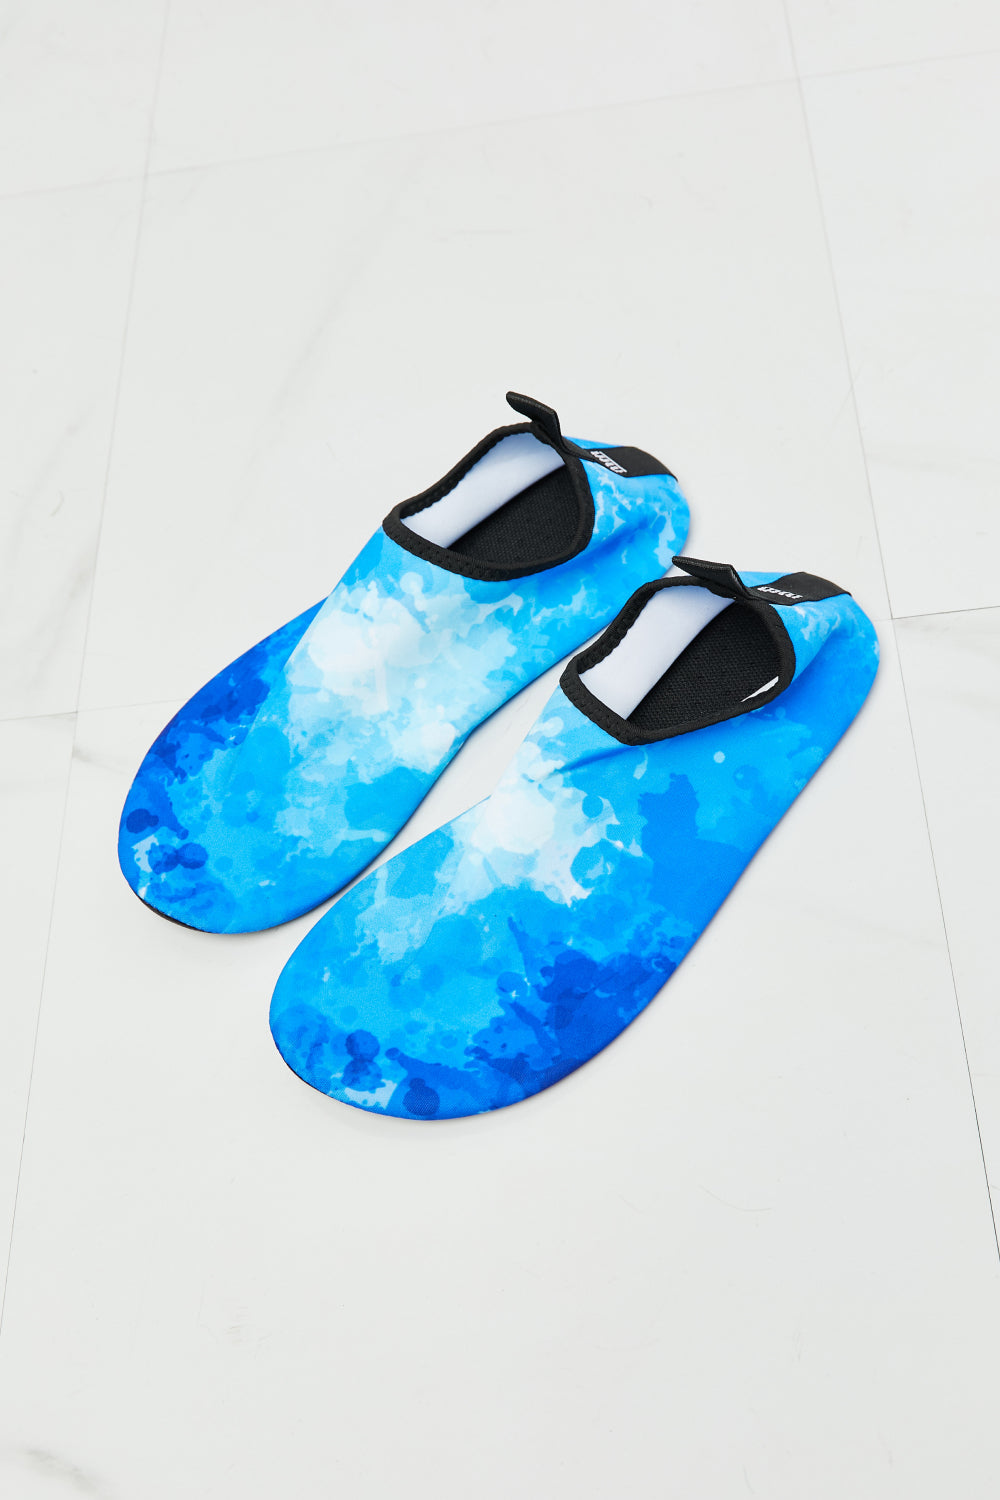 MMshoes On The Shore Water Shoes in Blue  Sunset and Swim   